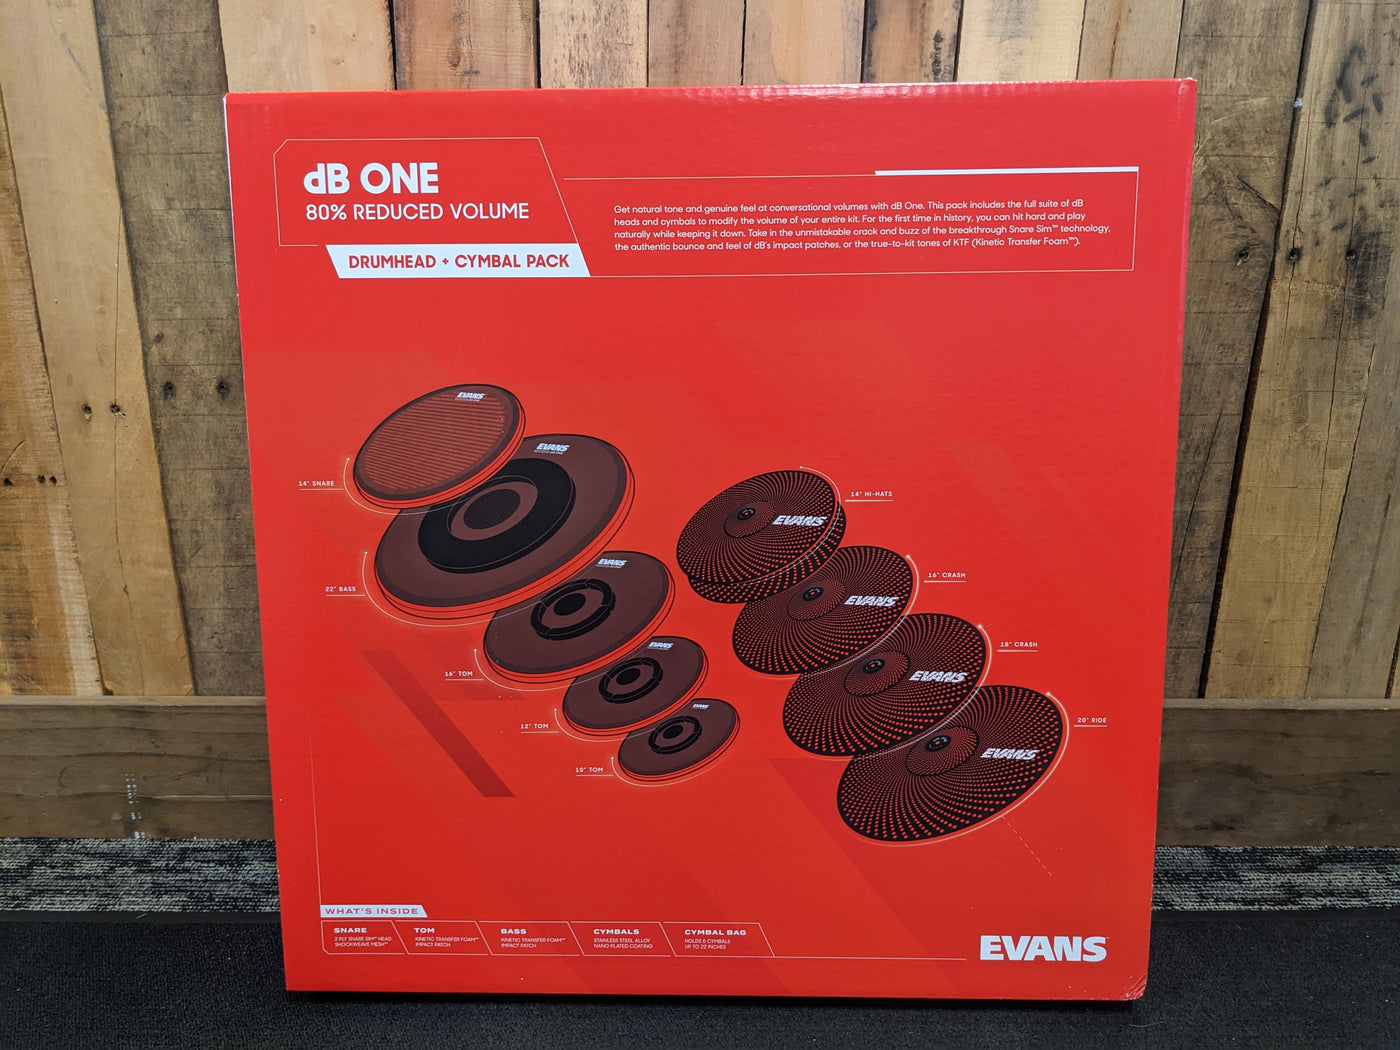 dB One Low Volume Drumhead and Cymbal Pack